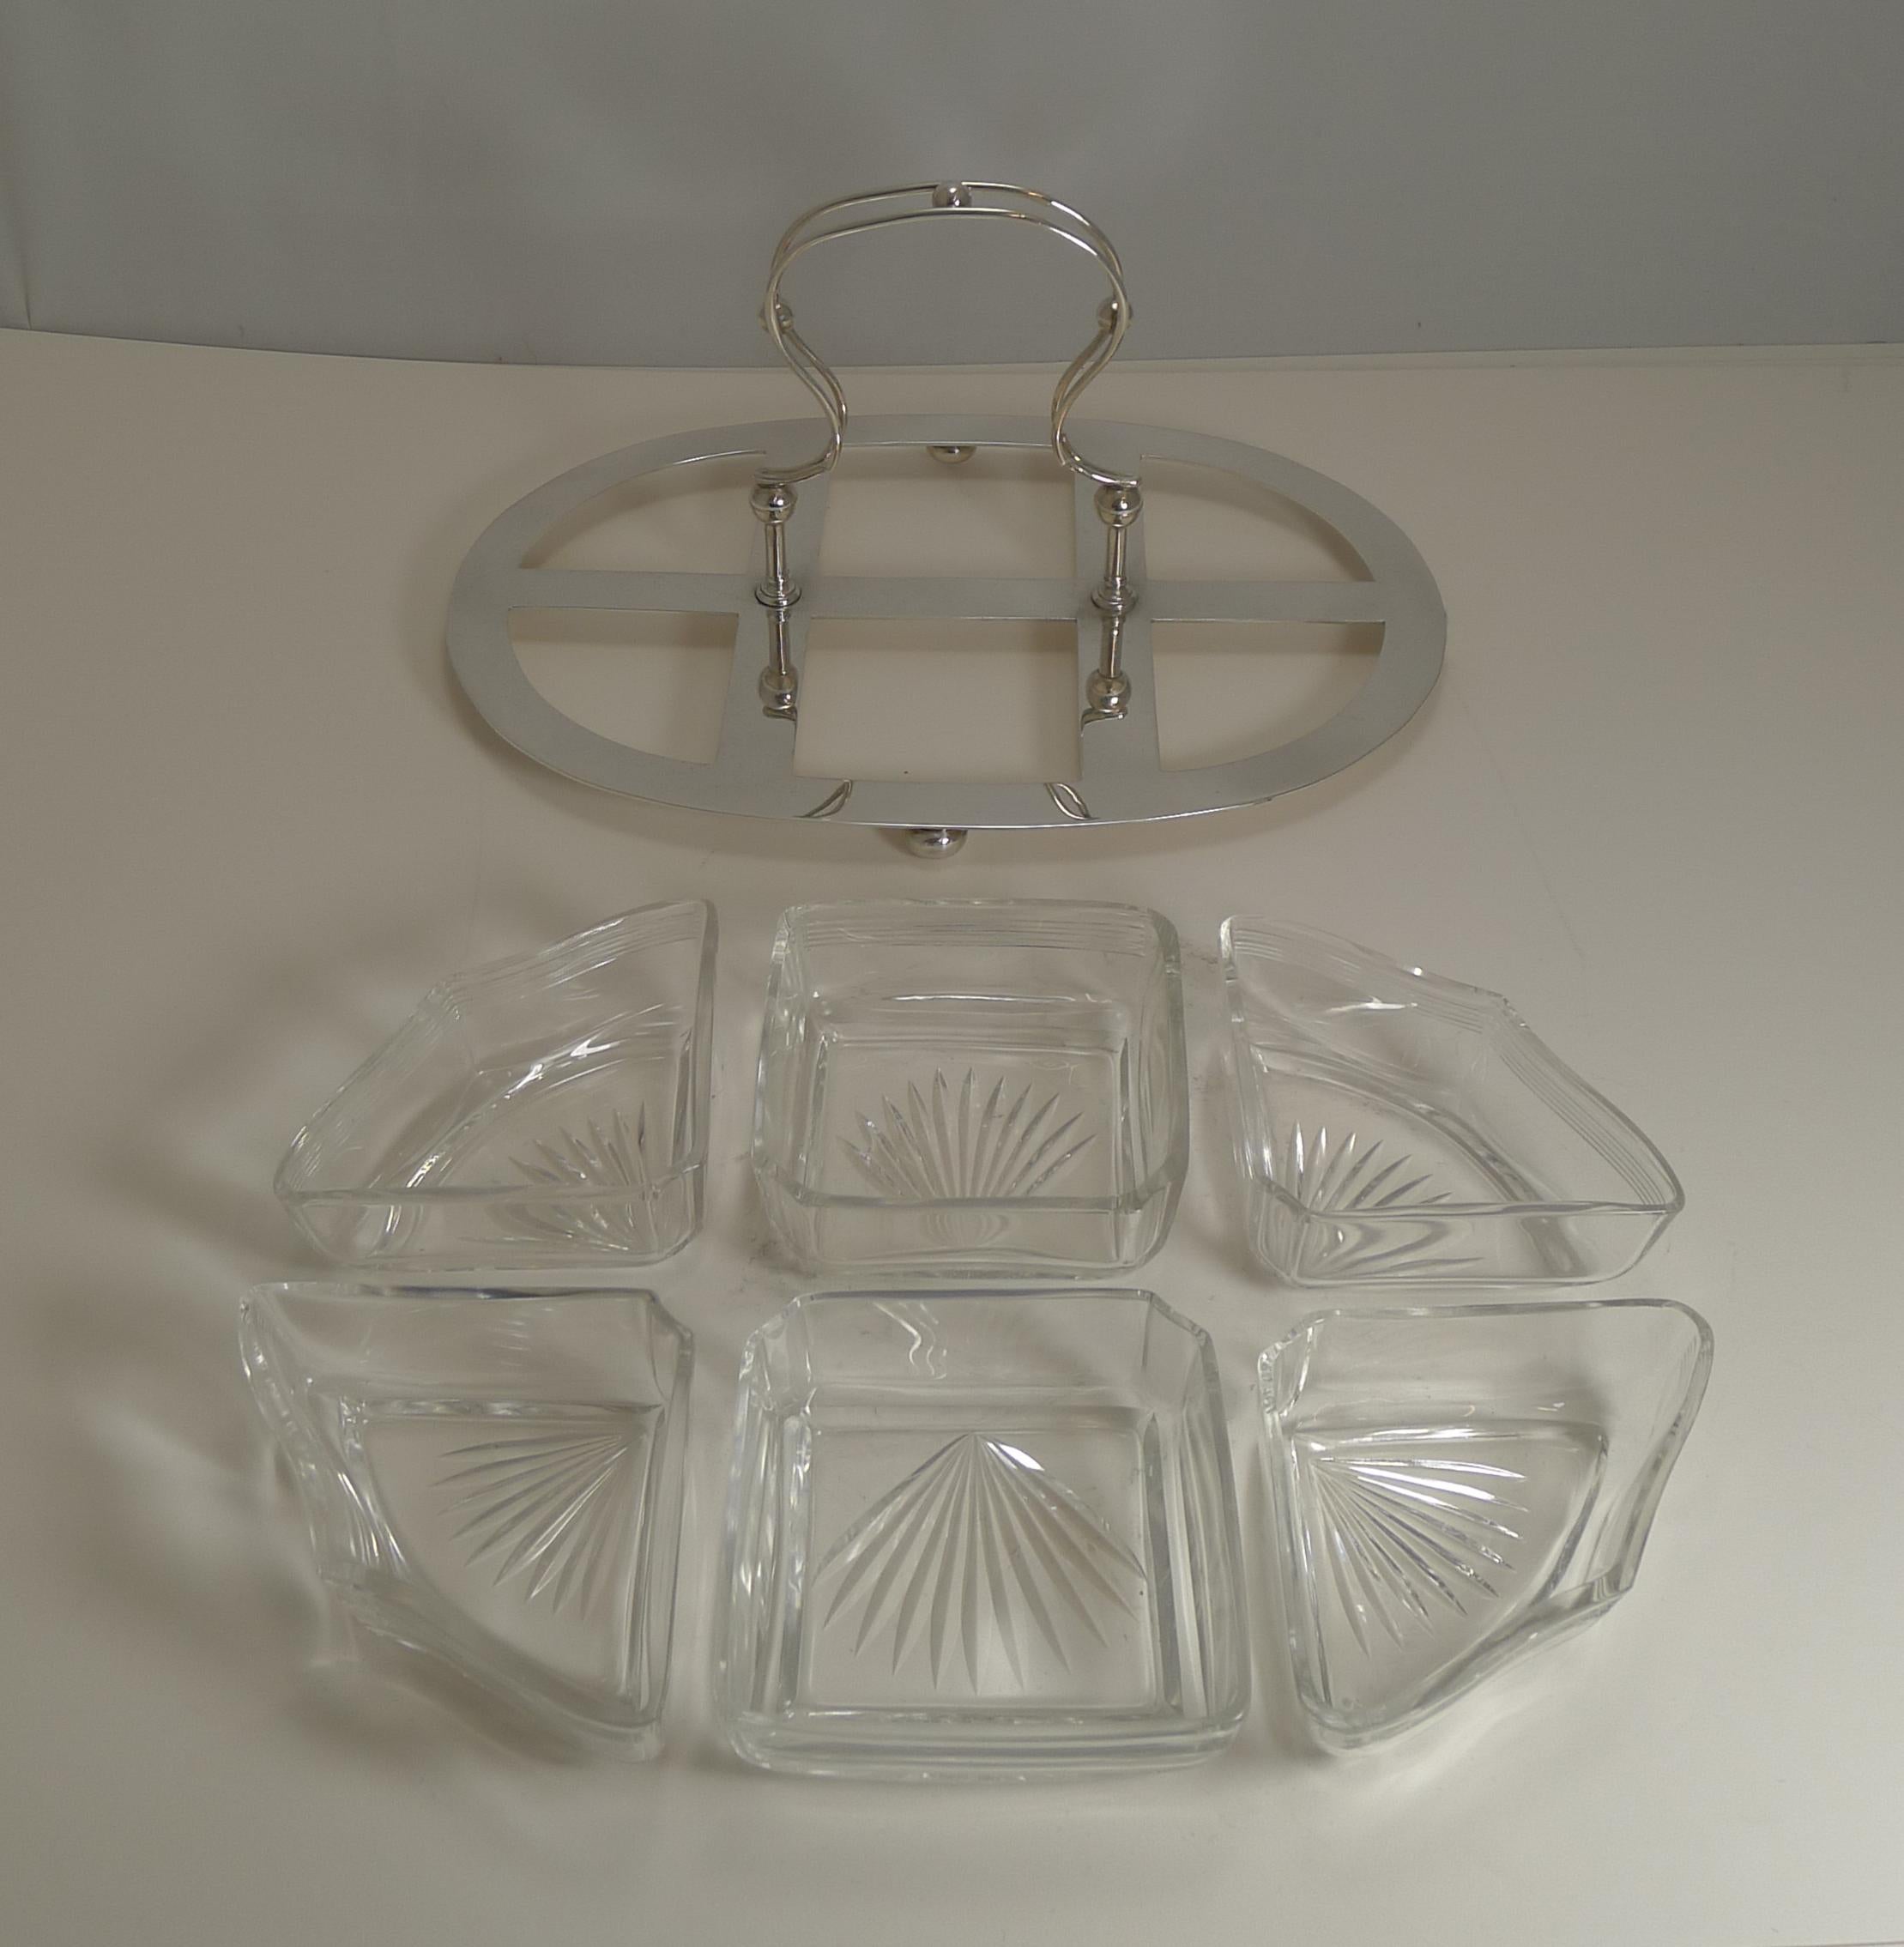 A most unusual vintage serving set, unusually made from sterling silver rather than silver plate, signed by the top-notch Sheffield silversmith, James Dixon and Sons.

The frame is fitted with the six original cut crystal dishes and come complete